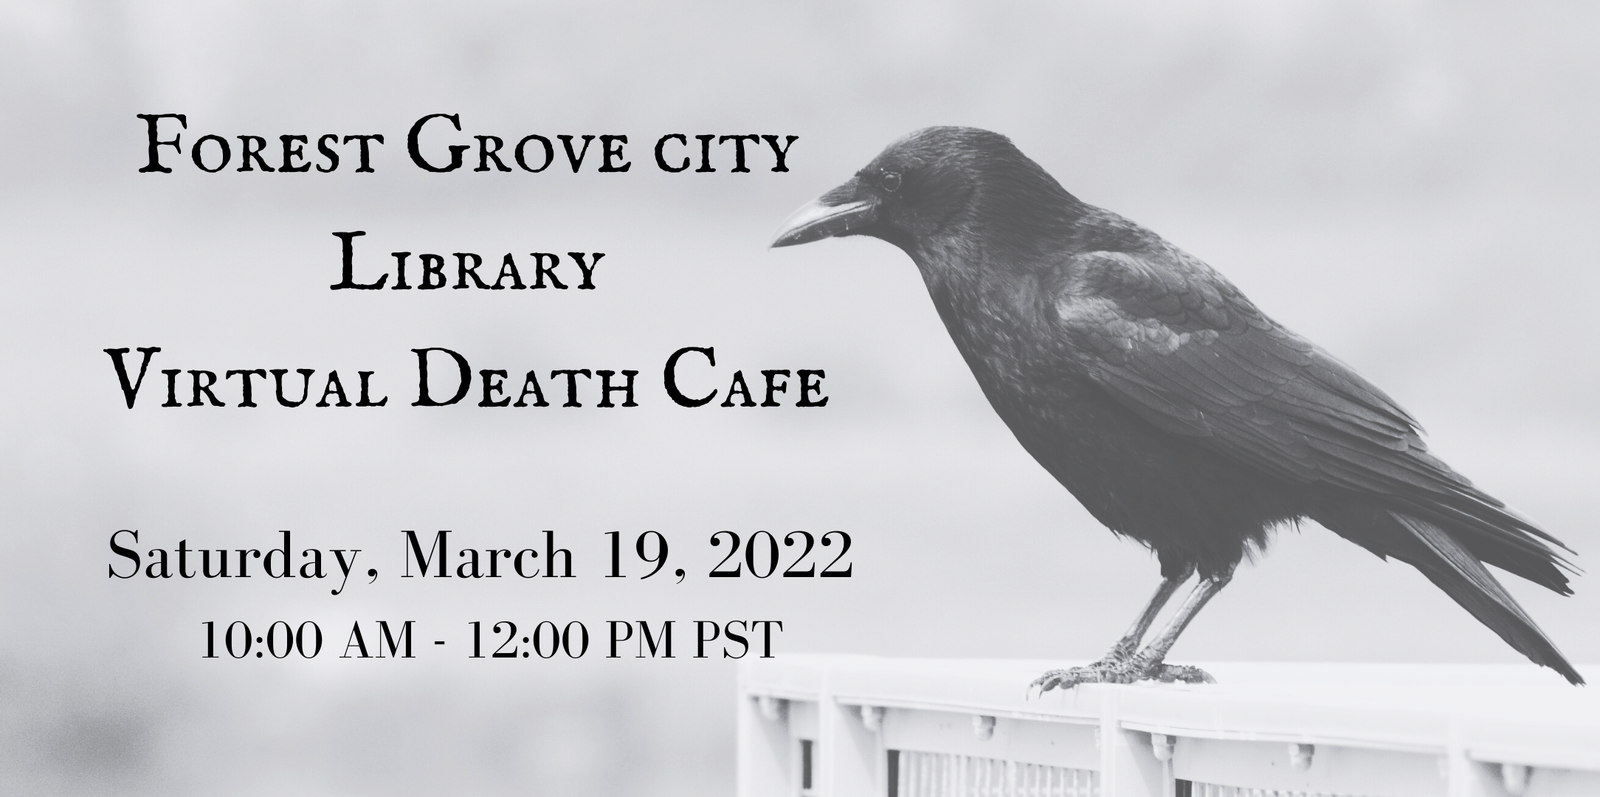 Virtual Death Cafe PST at Forest Grove City Library